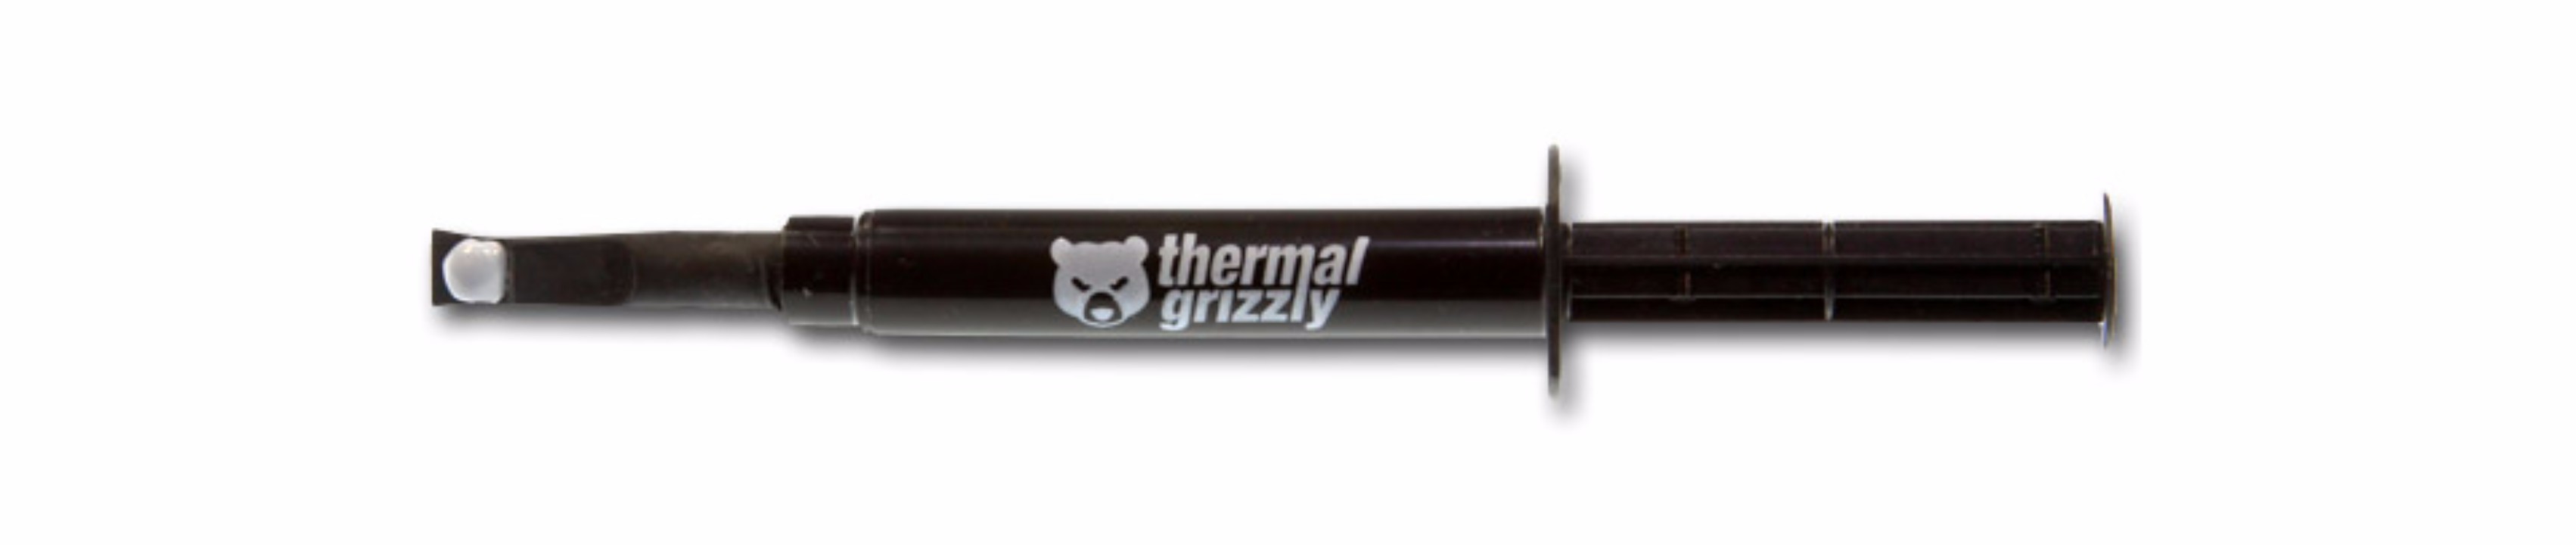 Pasta Térmica Thermal Grizzly Hydronaut (3.9g)